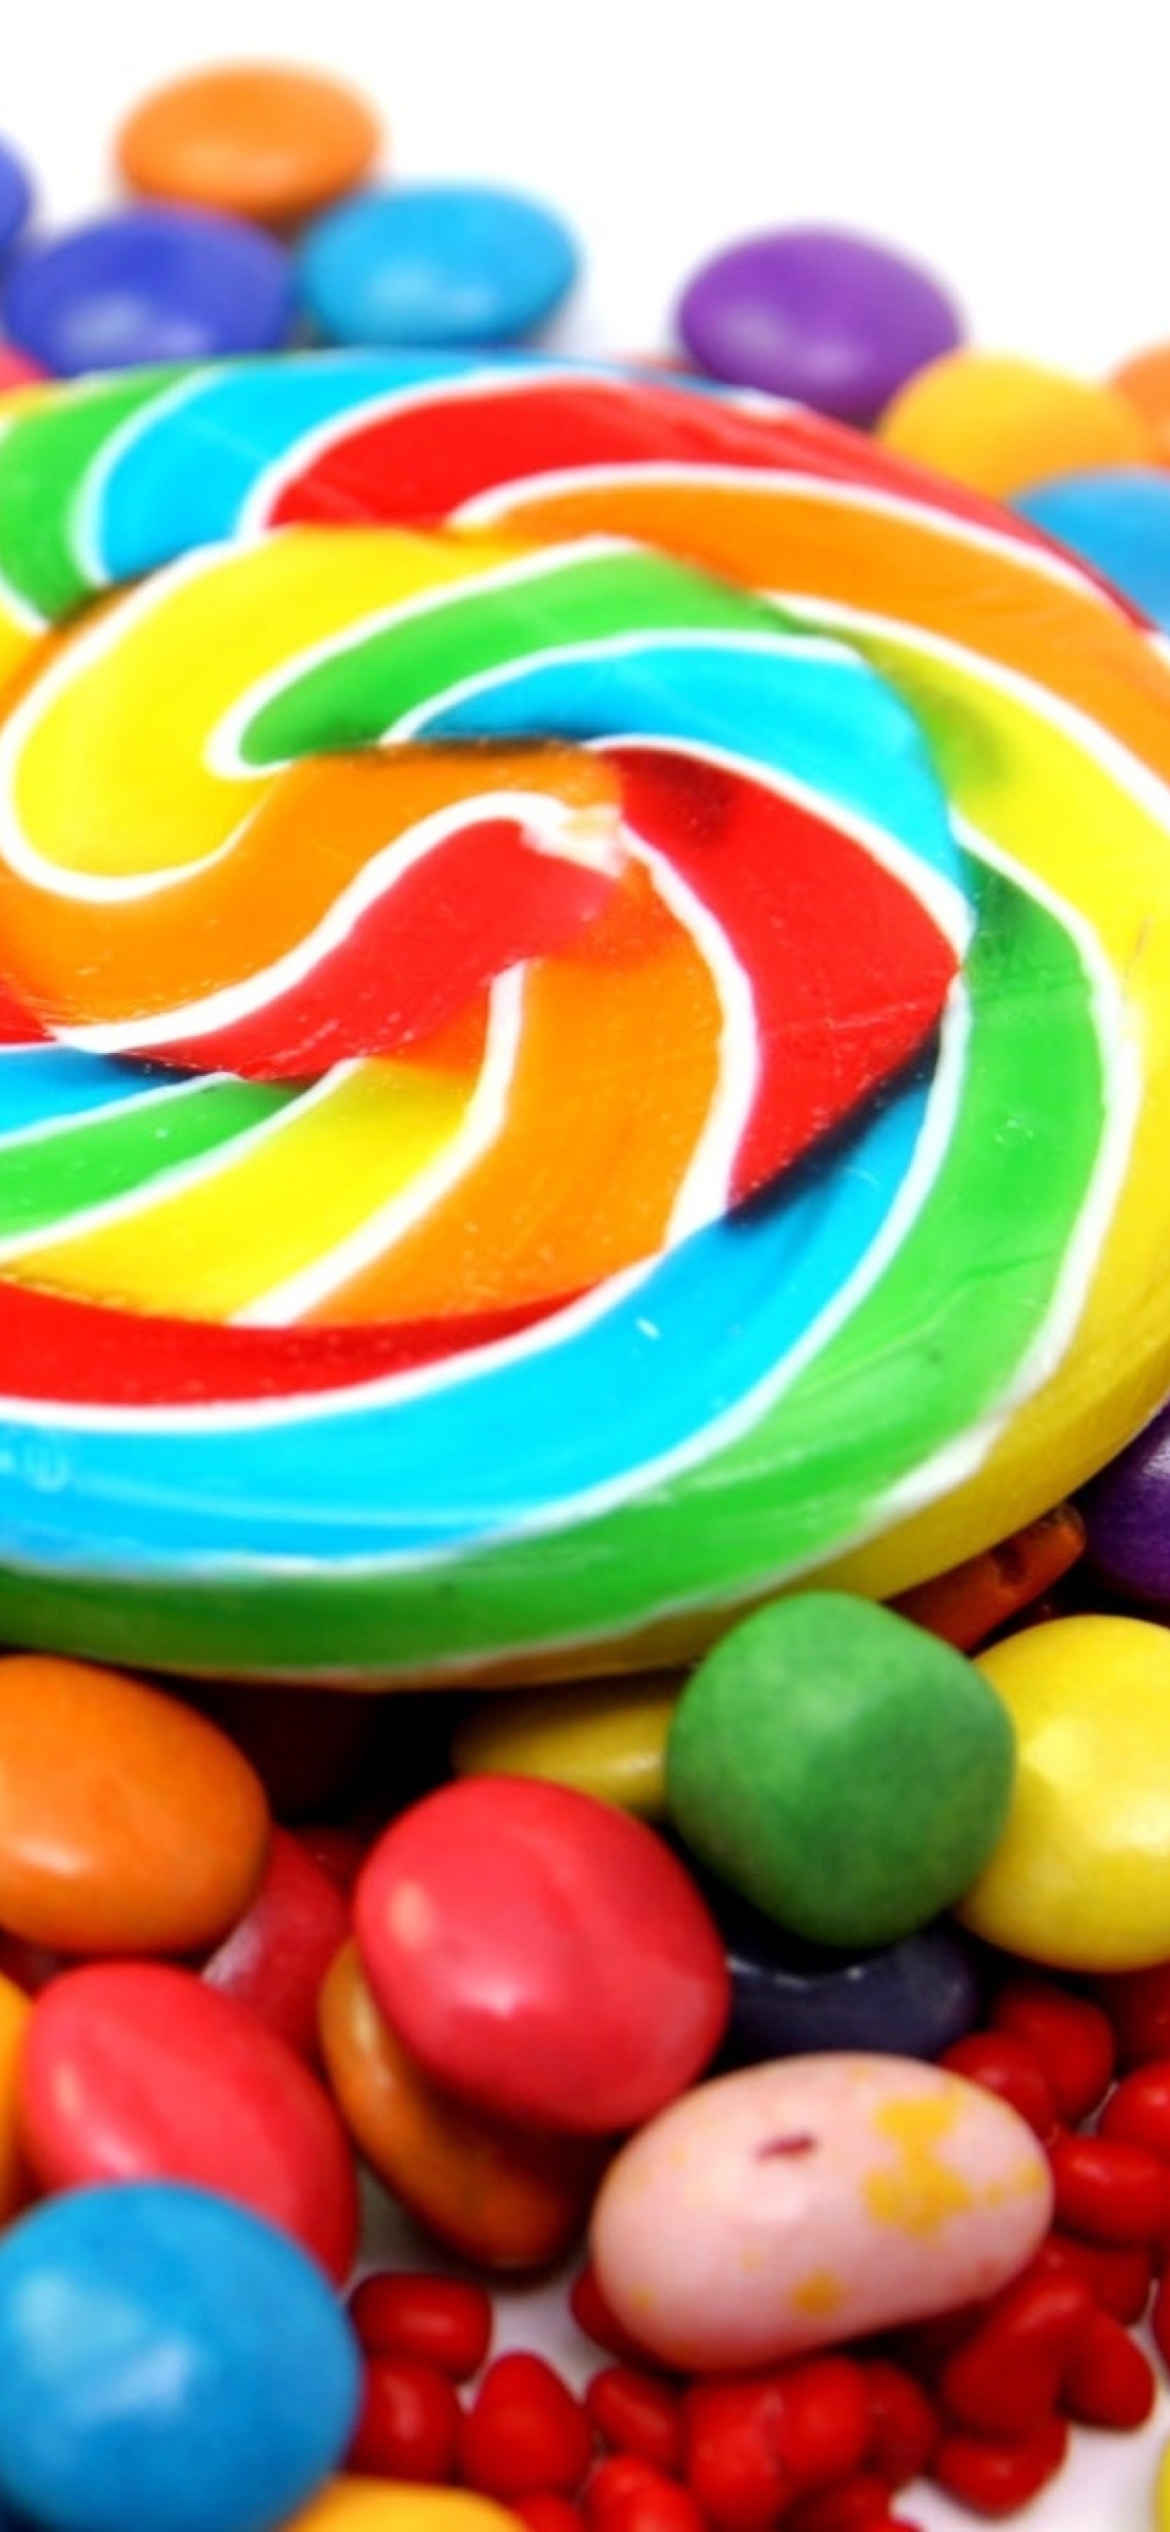 Colorful Candies wallpaper 1170x2532